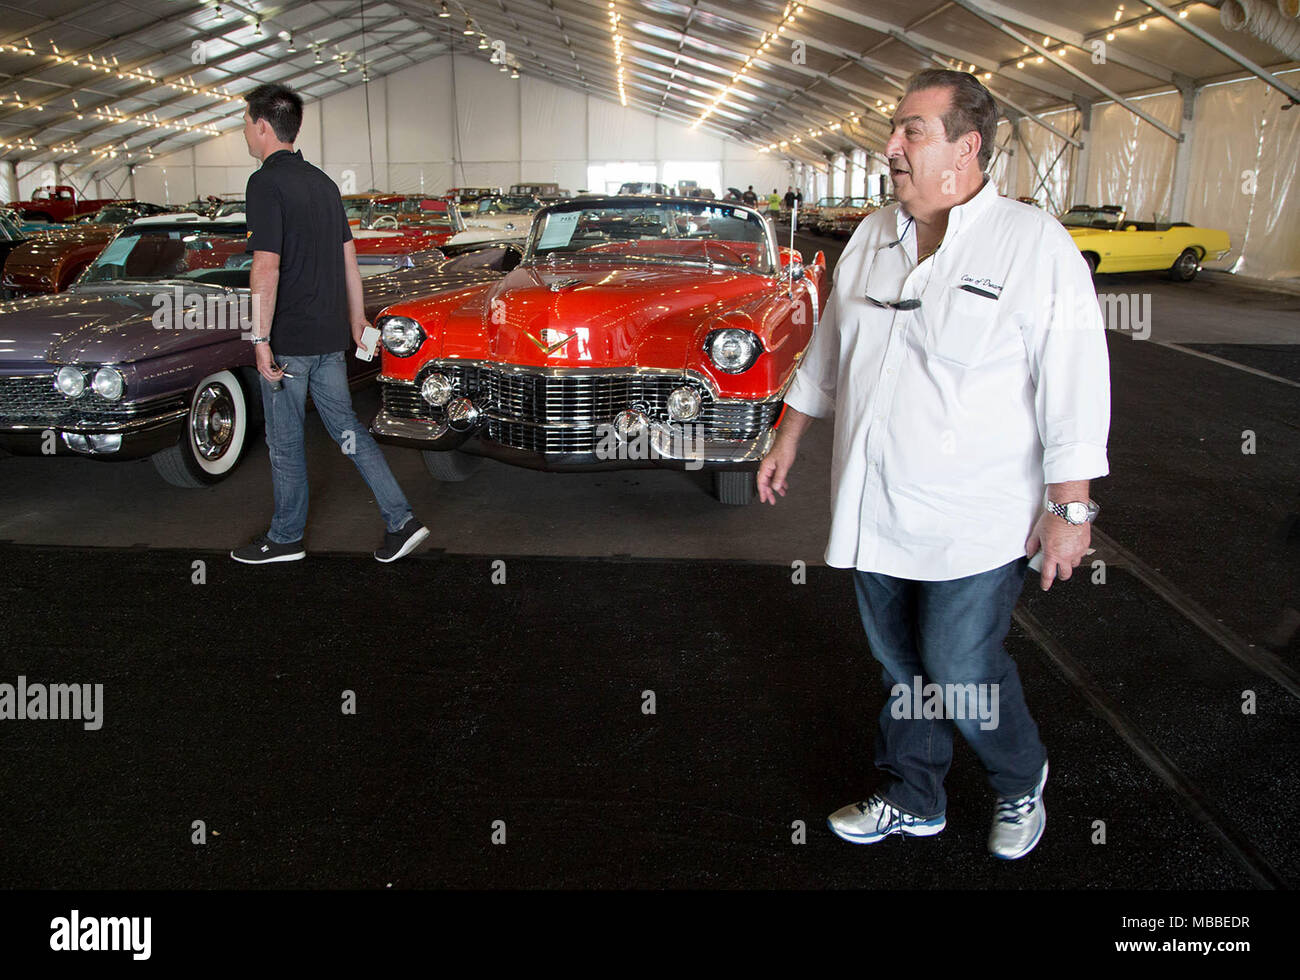 West Palm Beach, Florida, USA. 10th Apr, 2018. John Staluppi arrives at Barrett-Jackson auto auction at the South Florida Fairgrounds in West Palm Beach, Florida on April 10, 2018. Staluppi chaperoned a parade of selected cars from his Cars of Dreams Collection to the auto auction. Staluppi's collection of more than 140 cars will be sold at the 16th annual auction April 12-15. Staluppi plans to add to his current collection. Credit: Allen Eyestone/The Palm Beach Post/ZUMA Wire/Alamy Live News Stock Photo